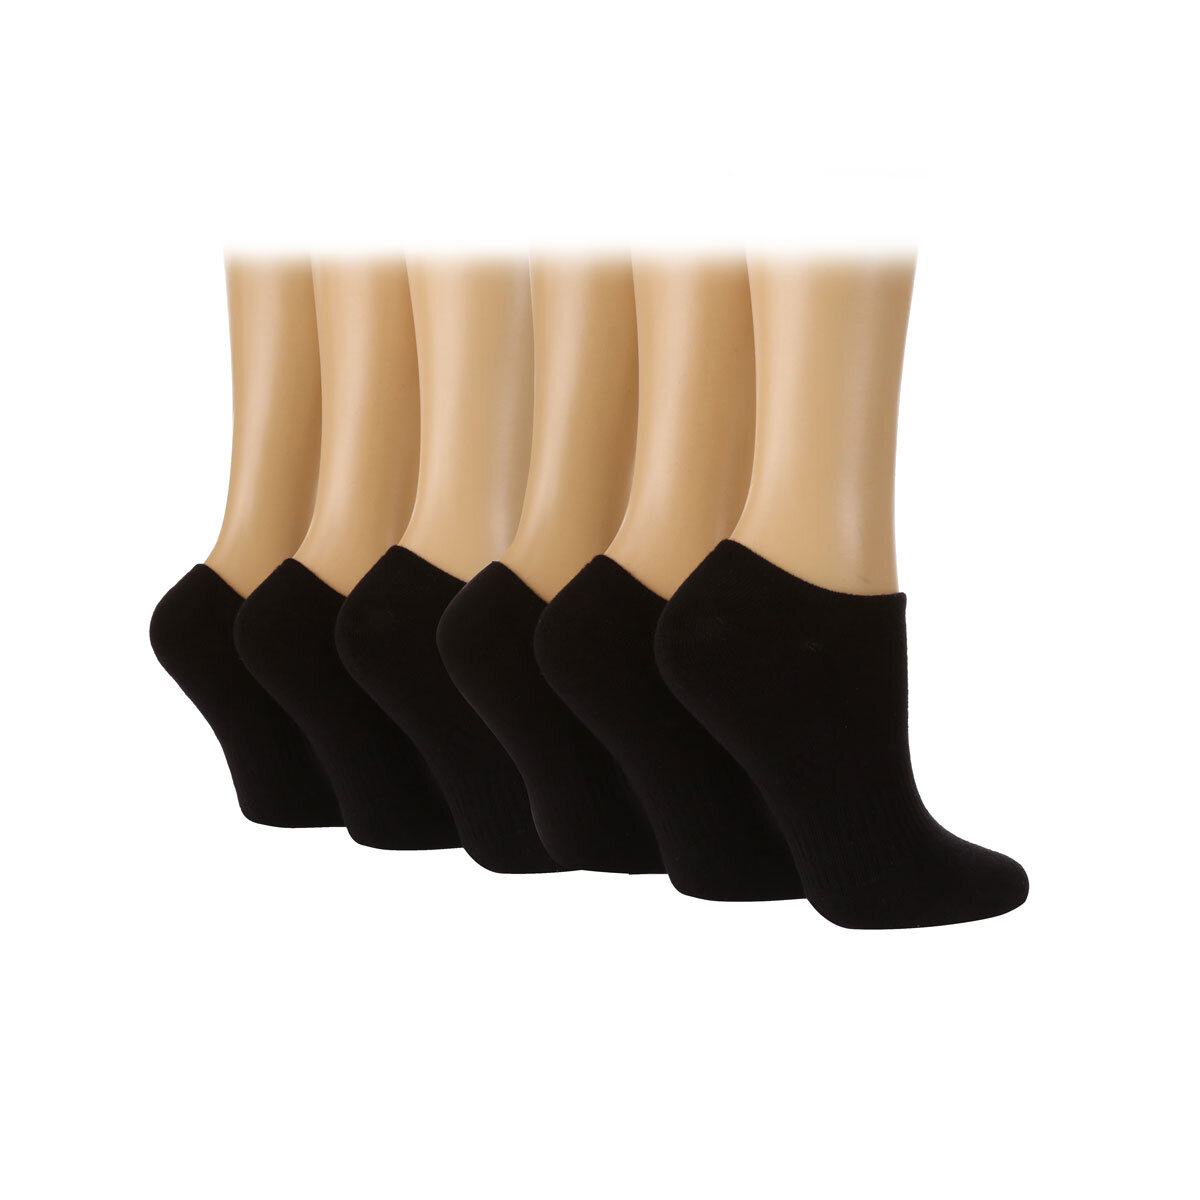 Glenmuir Women's 2 x 3 Pack Bamboo Cushioned Trainer Socks in Black, Size 4-8